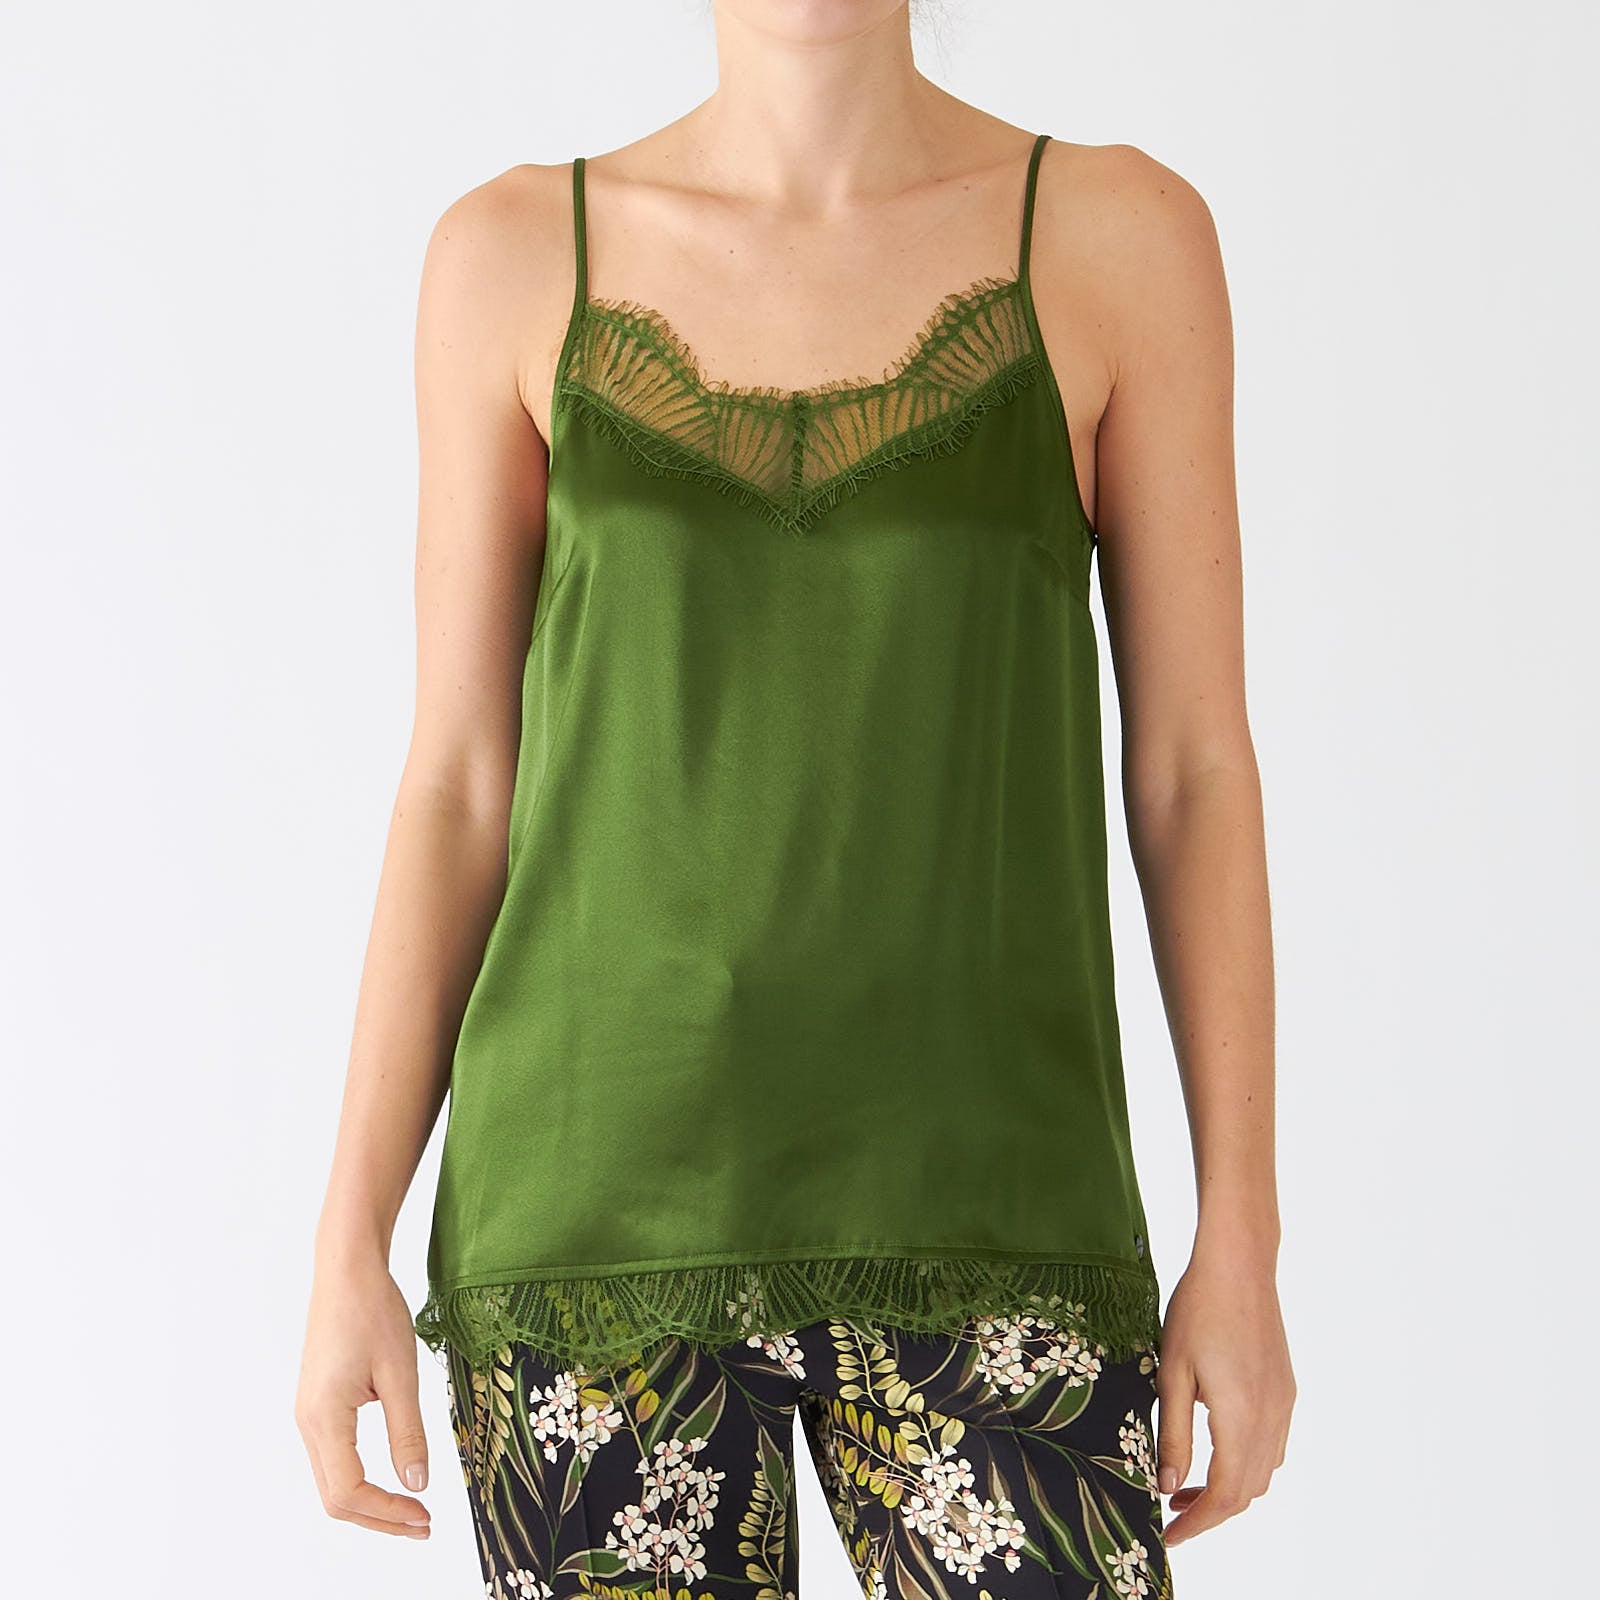 Orient Green Lace Silk Camisole